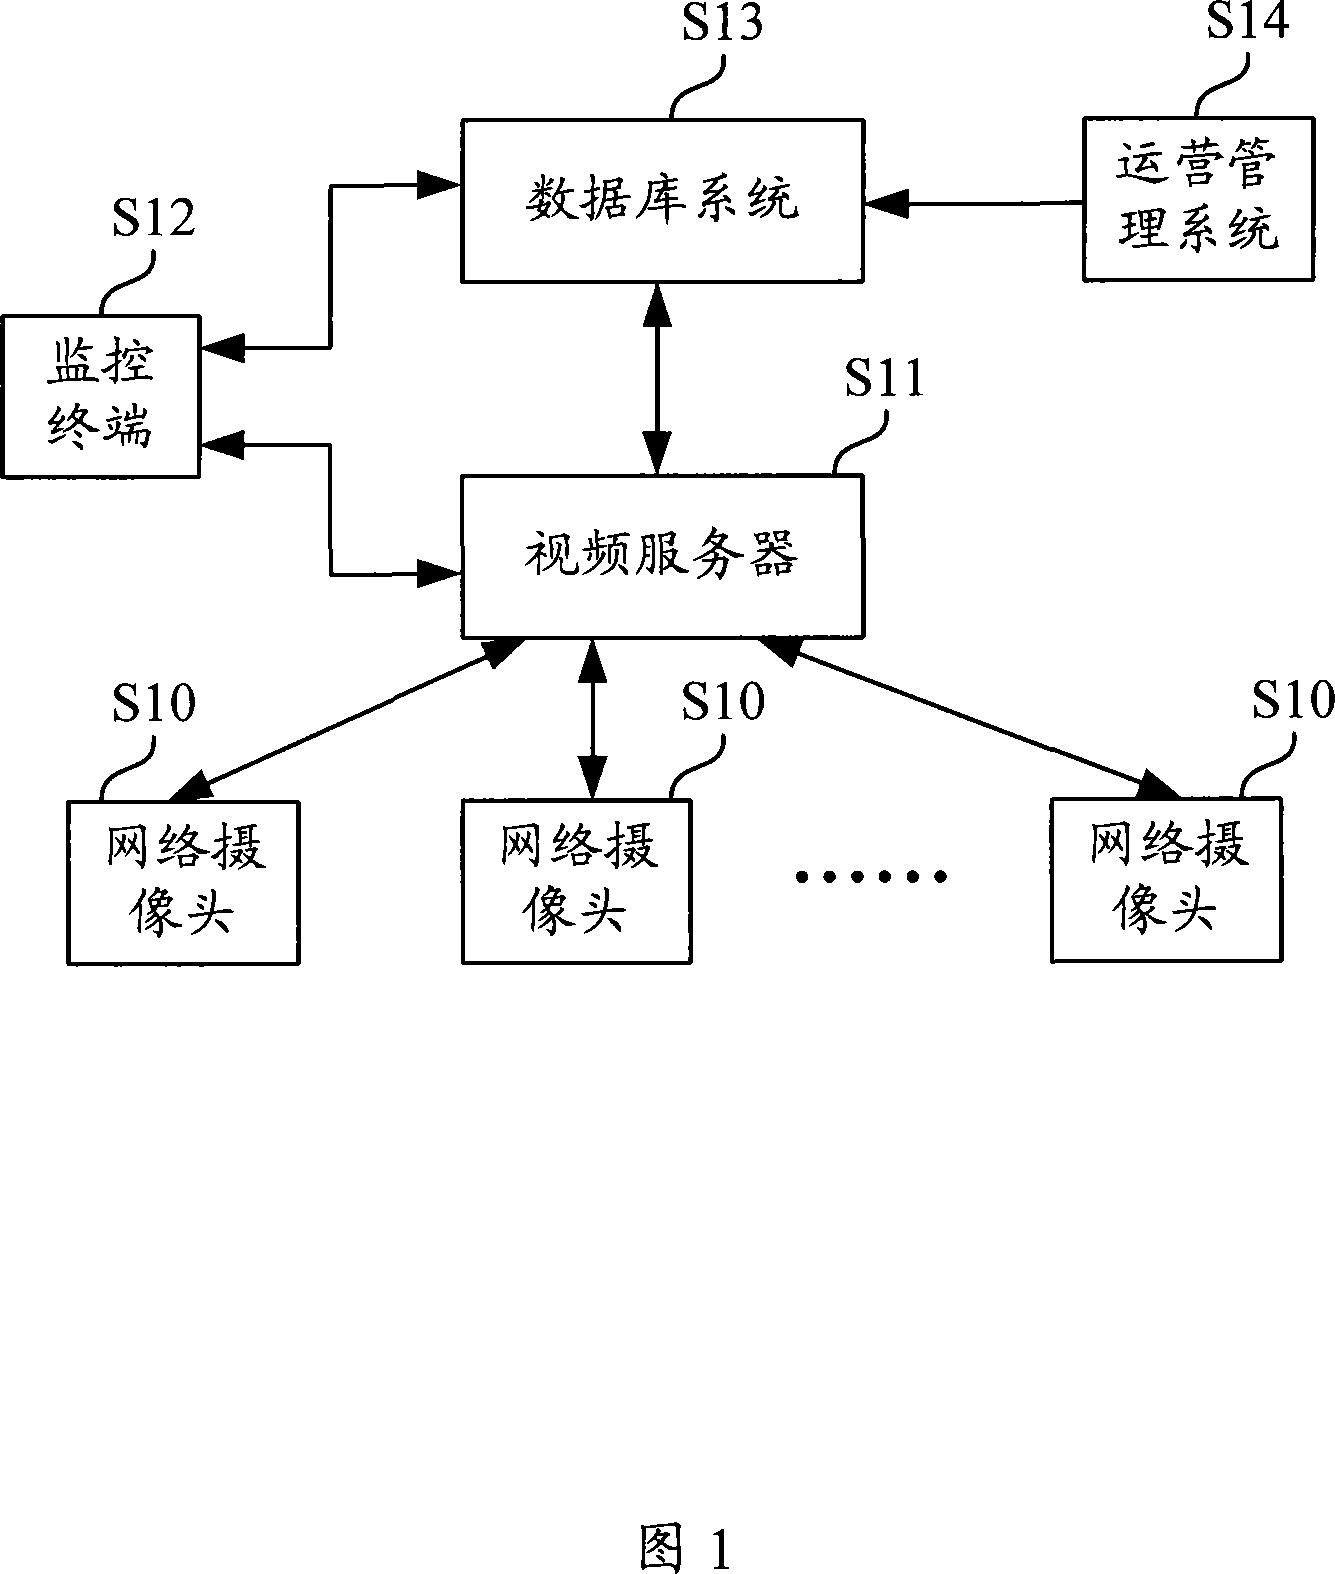 Apparatus and method for implementing time shifting broadcast in network monitoring as well as video server